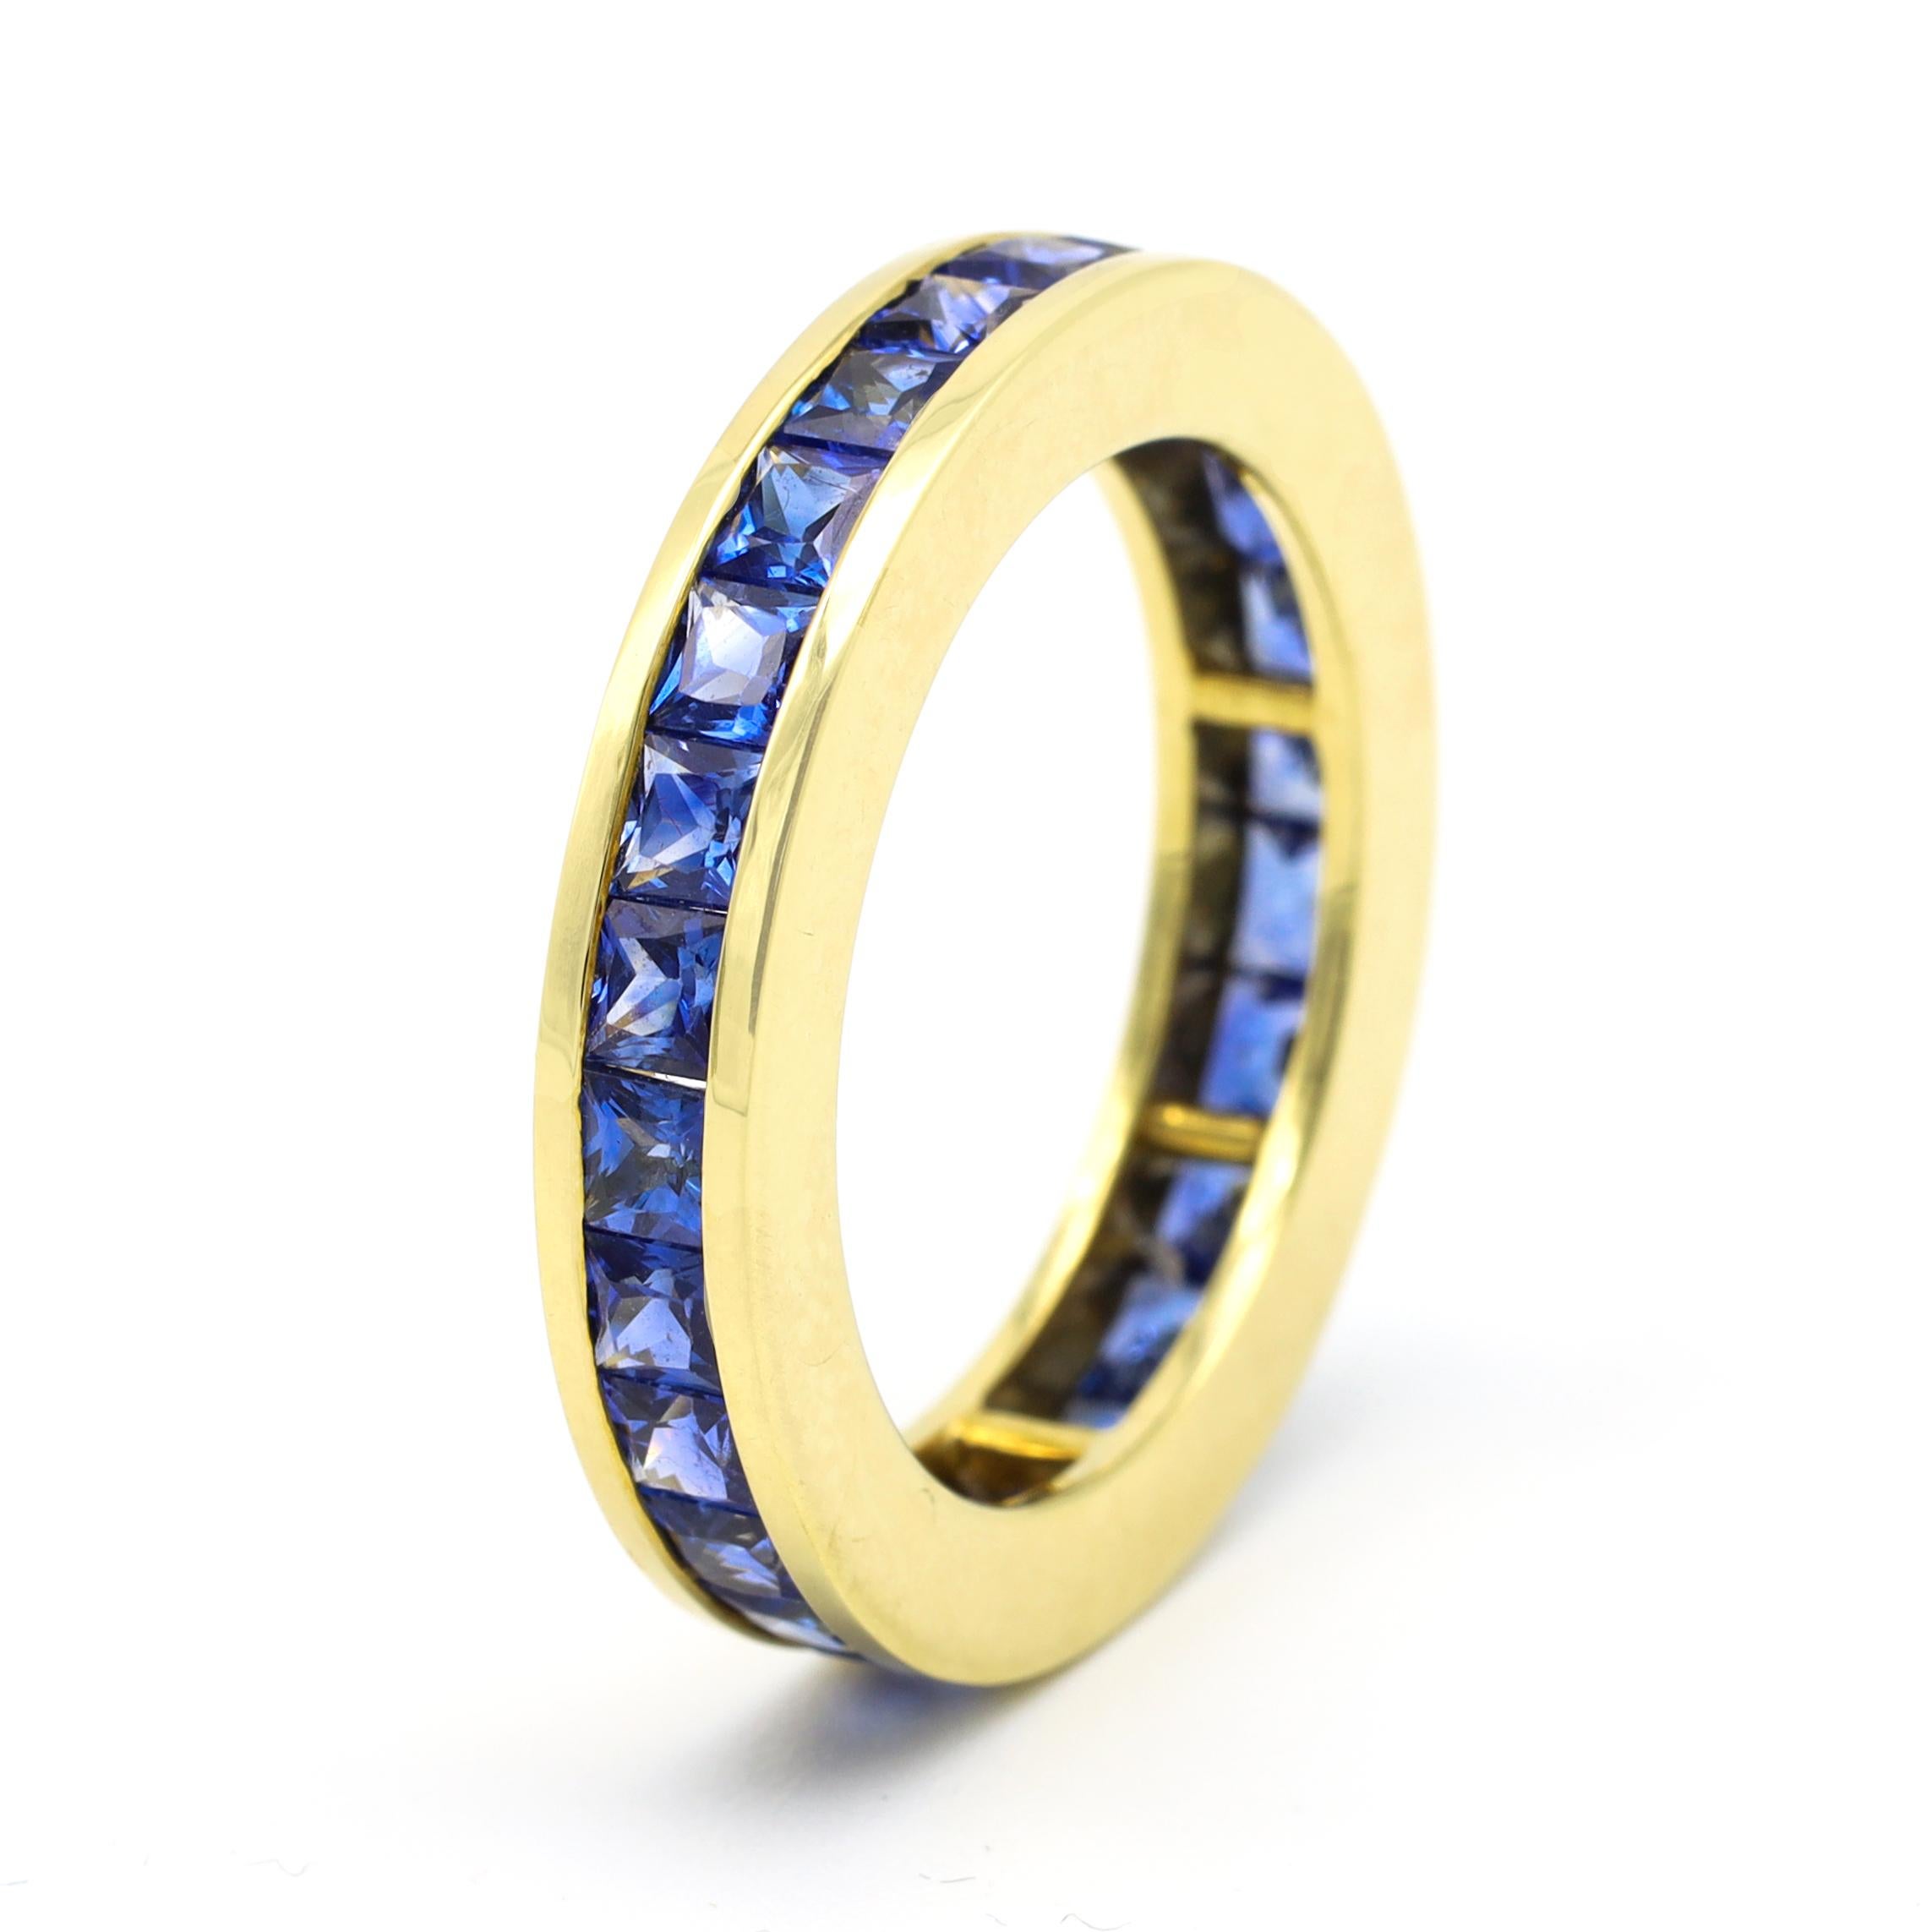 18 Karat Yellow Gold 3.64 Carat Sapphire Princess-Cut Band Eternity Ring

This understated delicate azure princess-cut blue sapphire band is tasteful. The sapphires are princess-cut right to the crown to bring out the ultimate blue color each